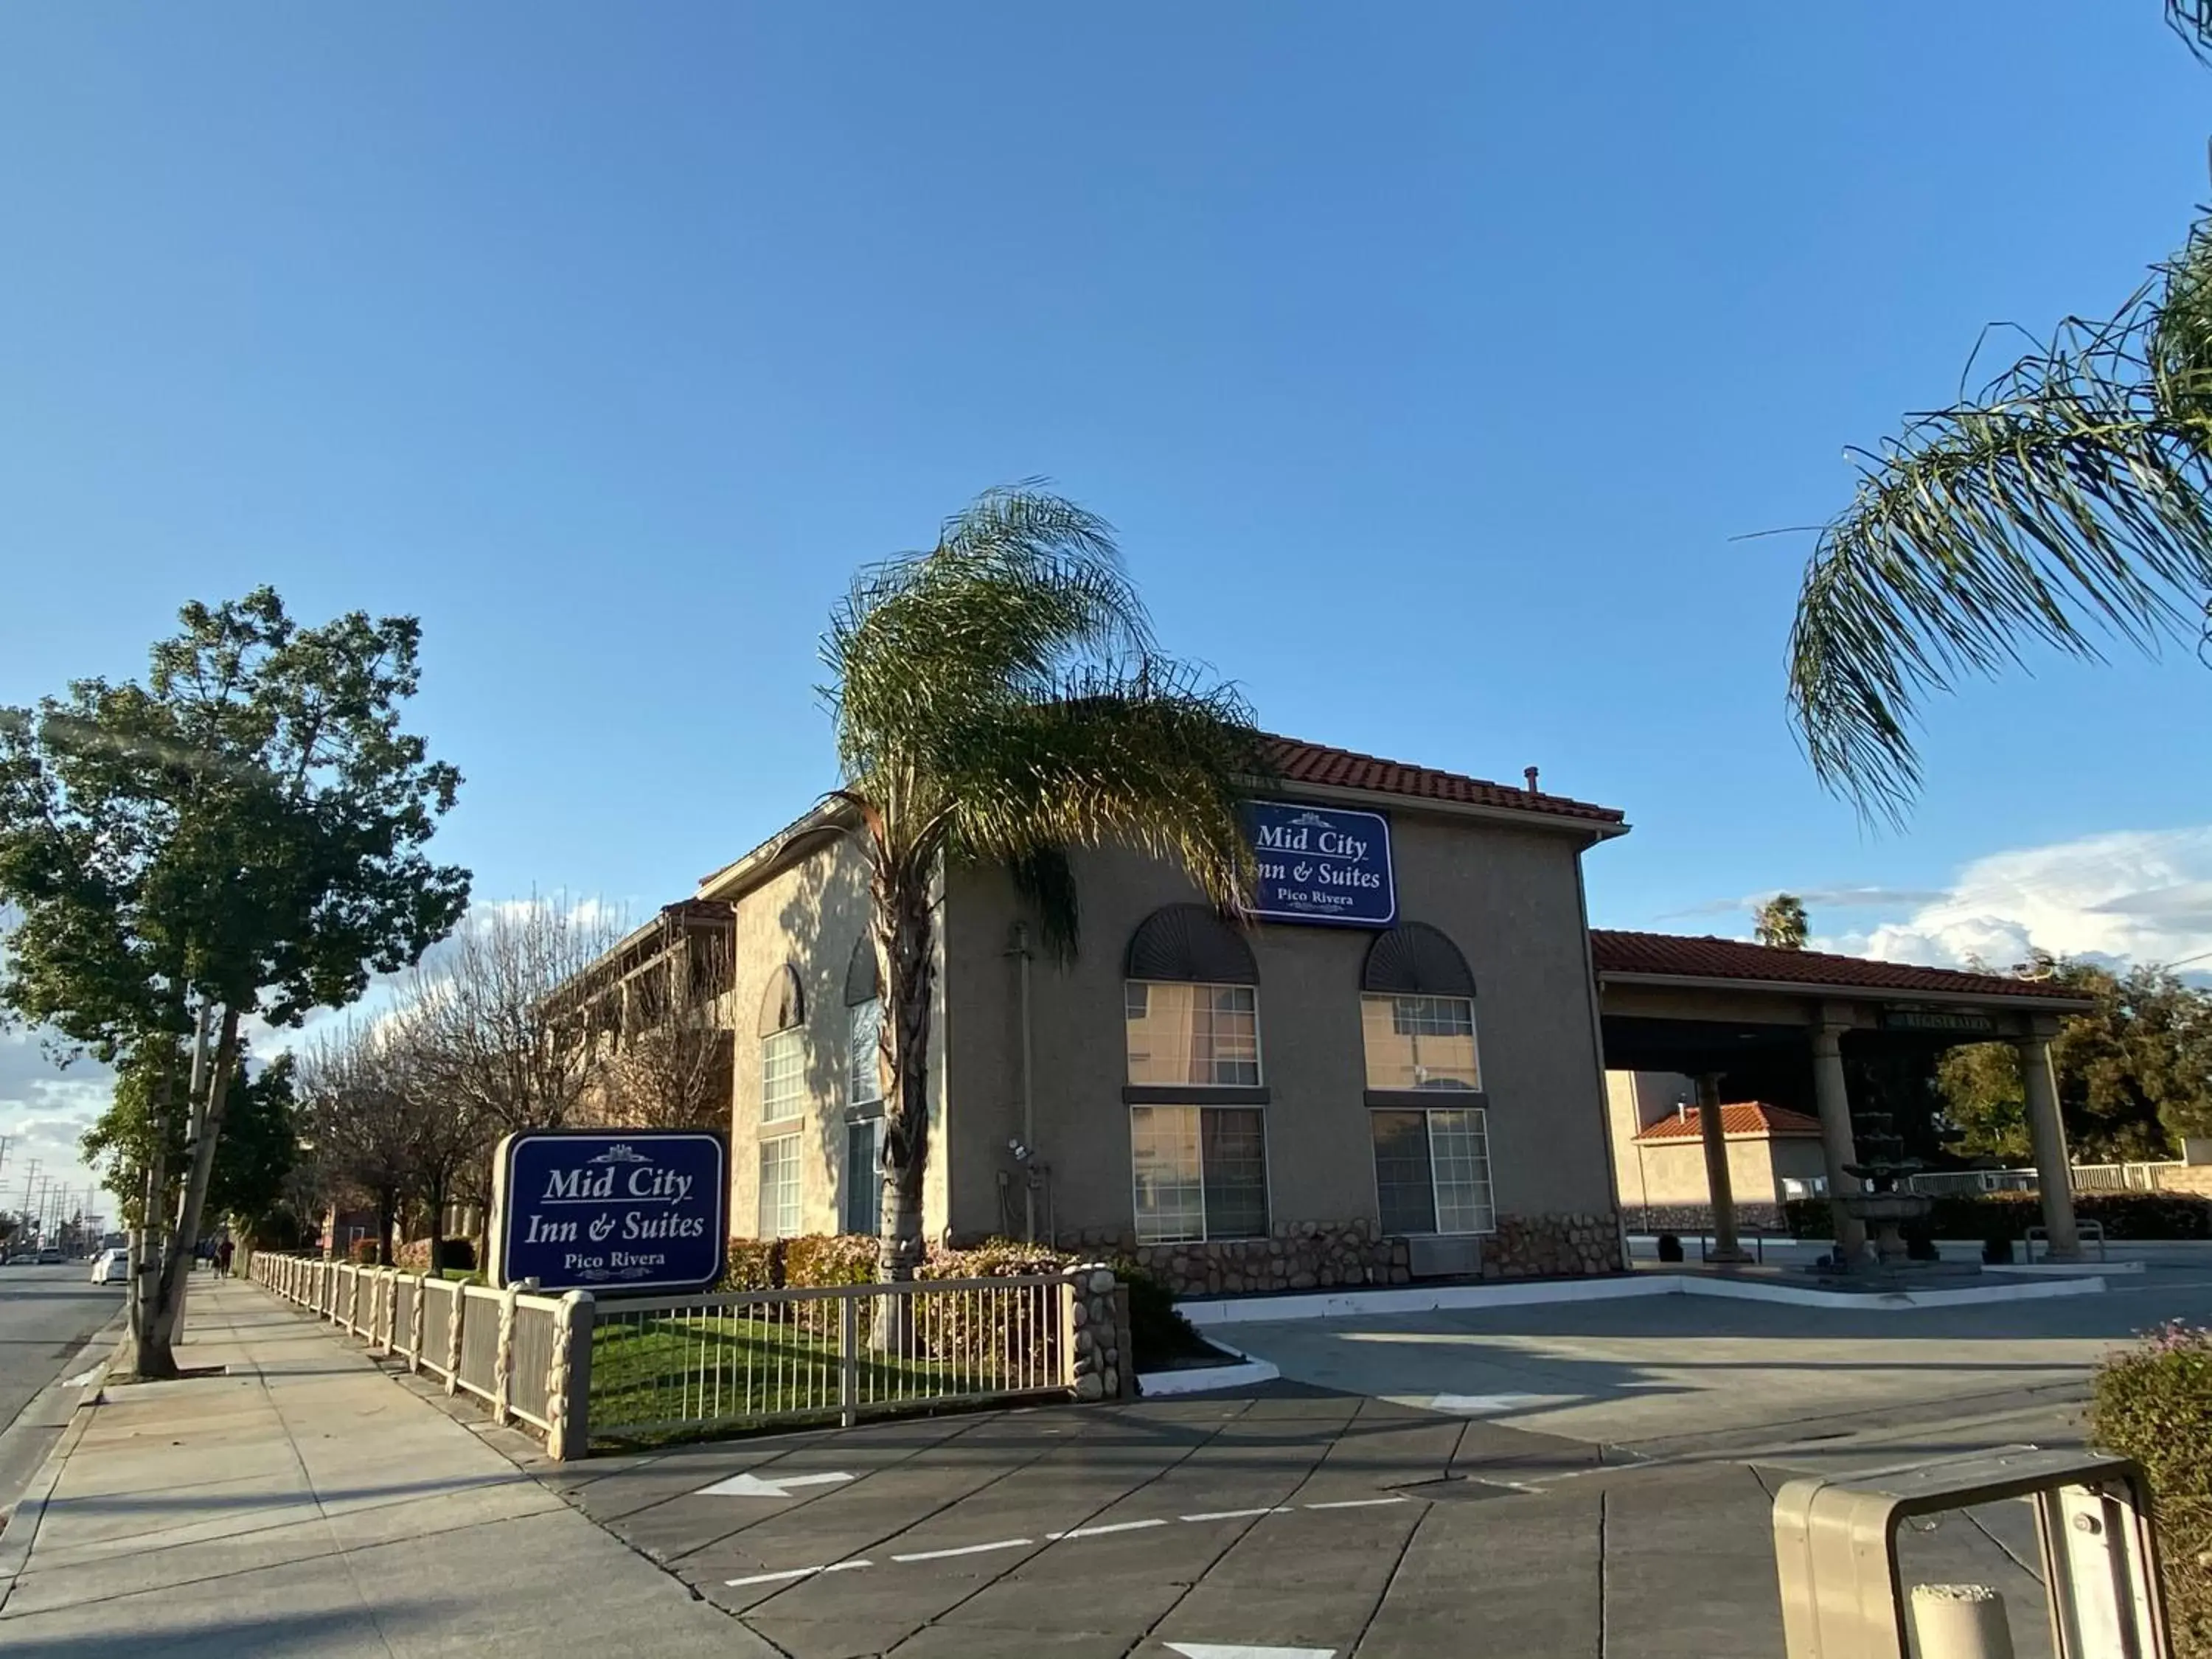 Property Building in Mid City Inn & Suites Pico Rivera